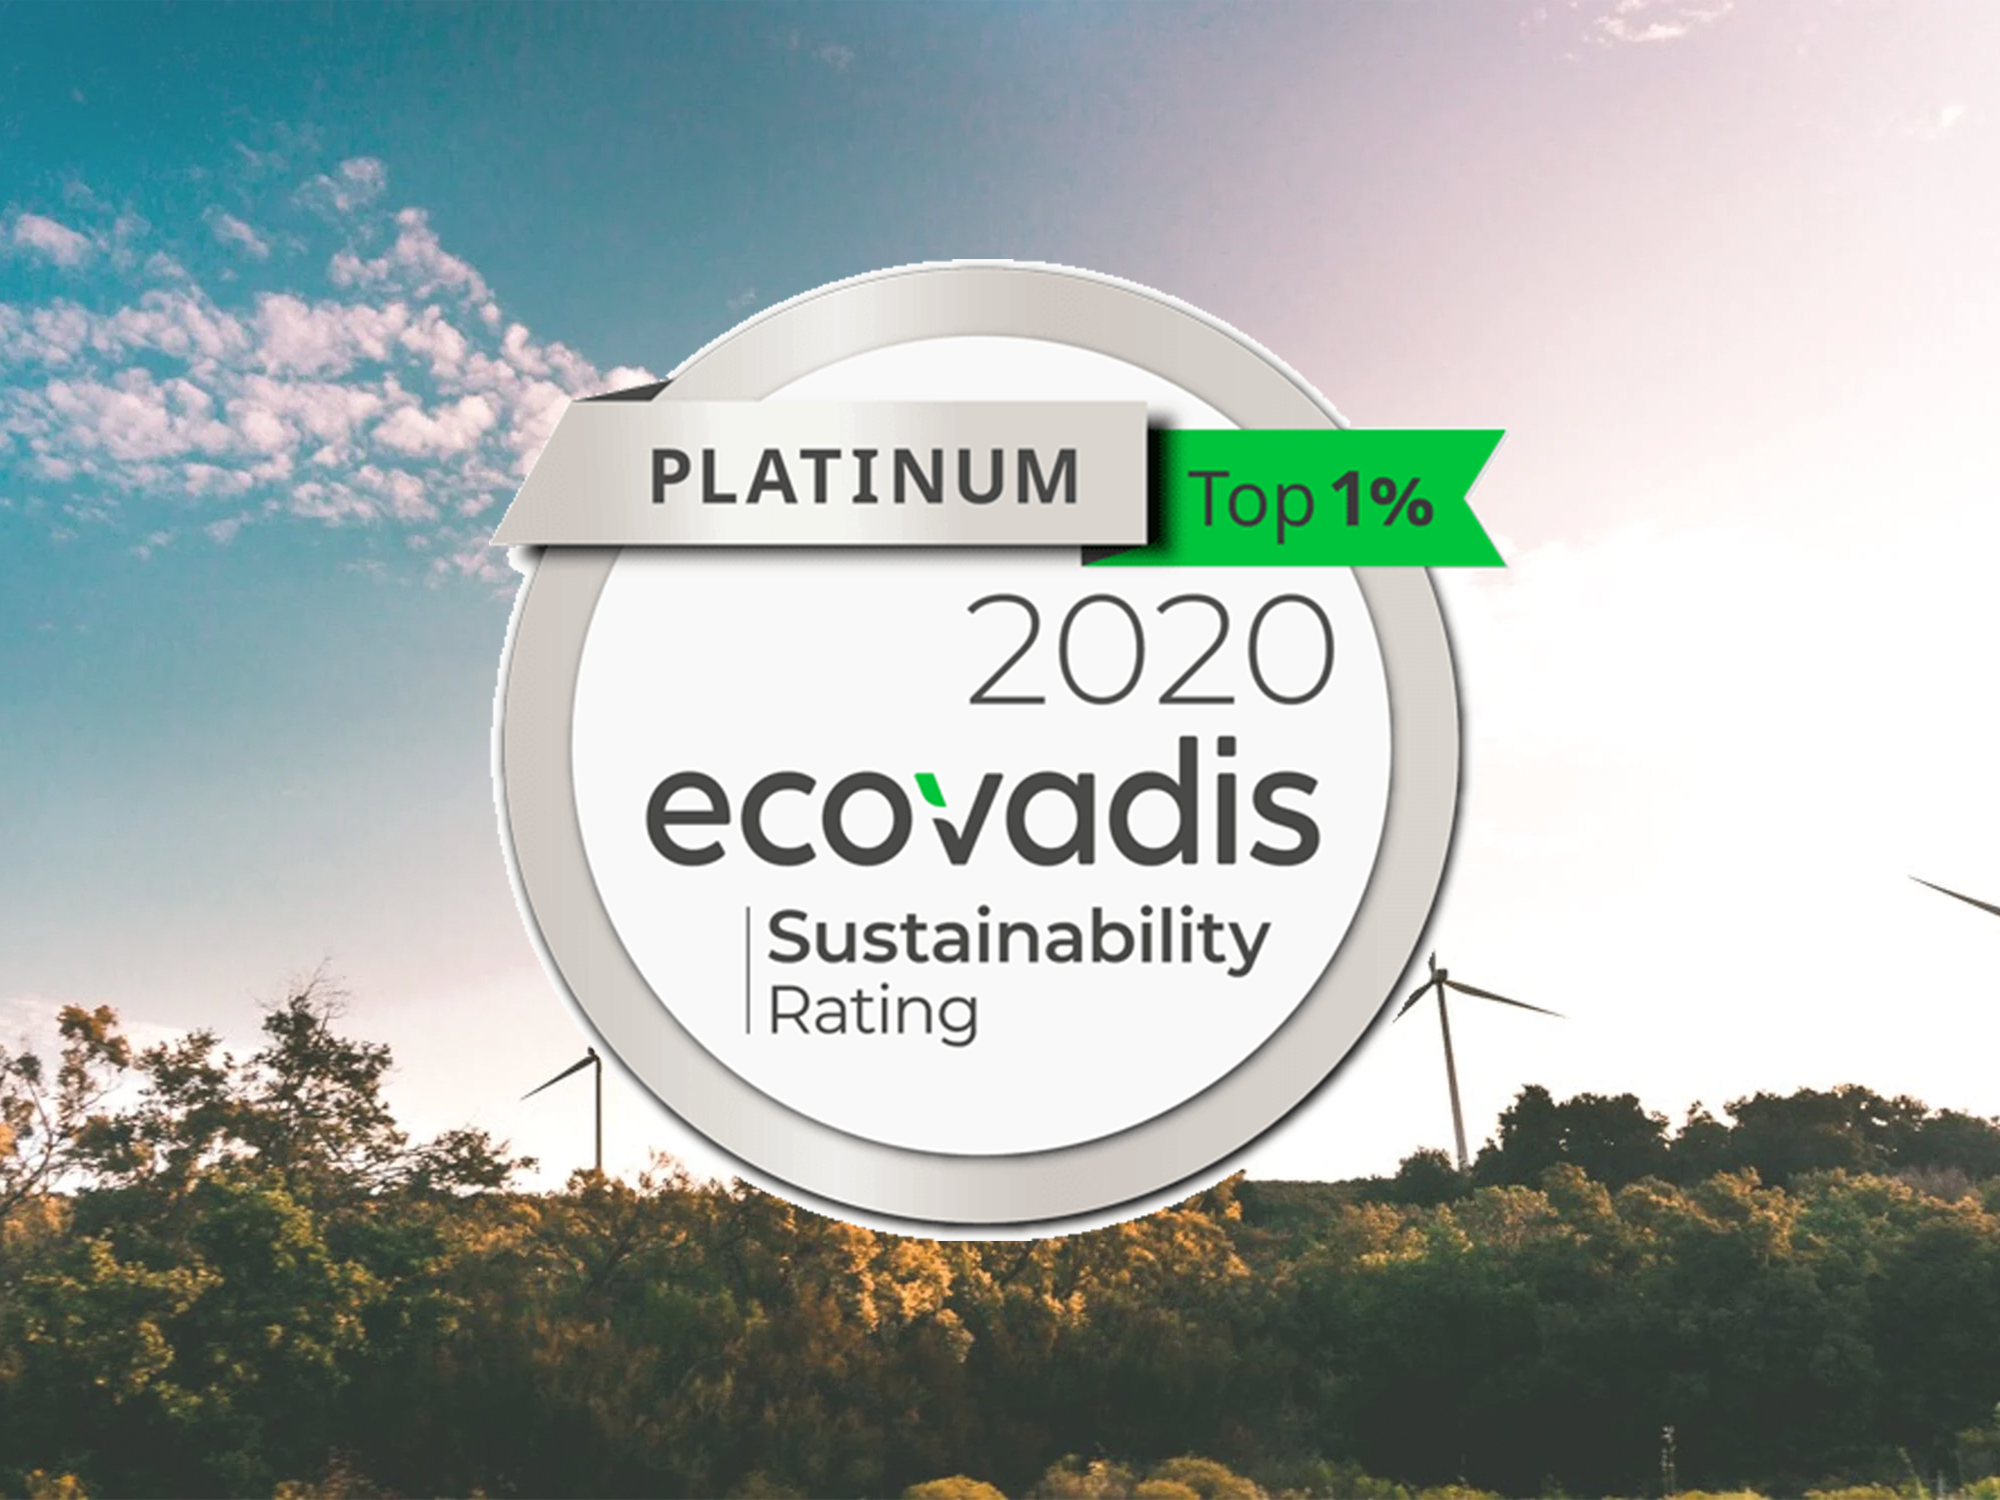 Montreal Careers - MA awarded ‘Platinum’ rating by EcoVadis for sustainability